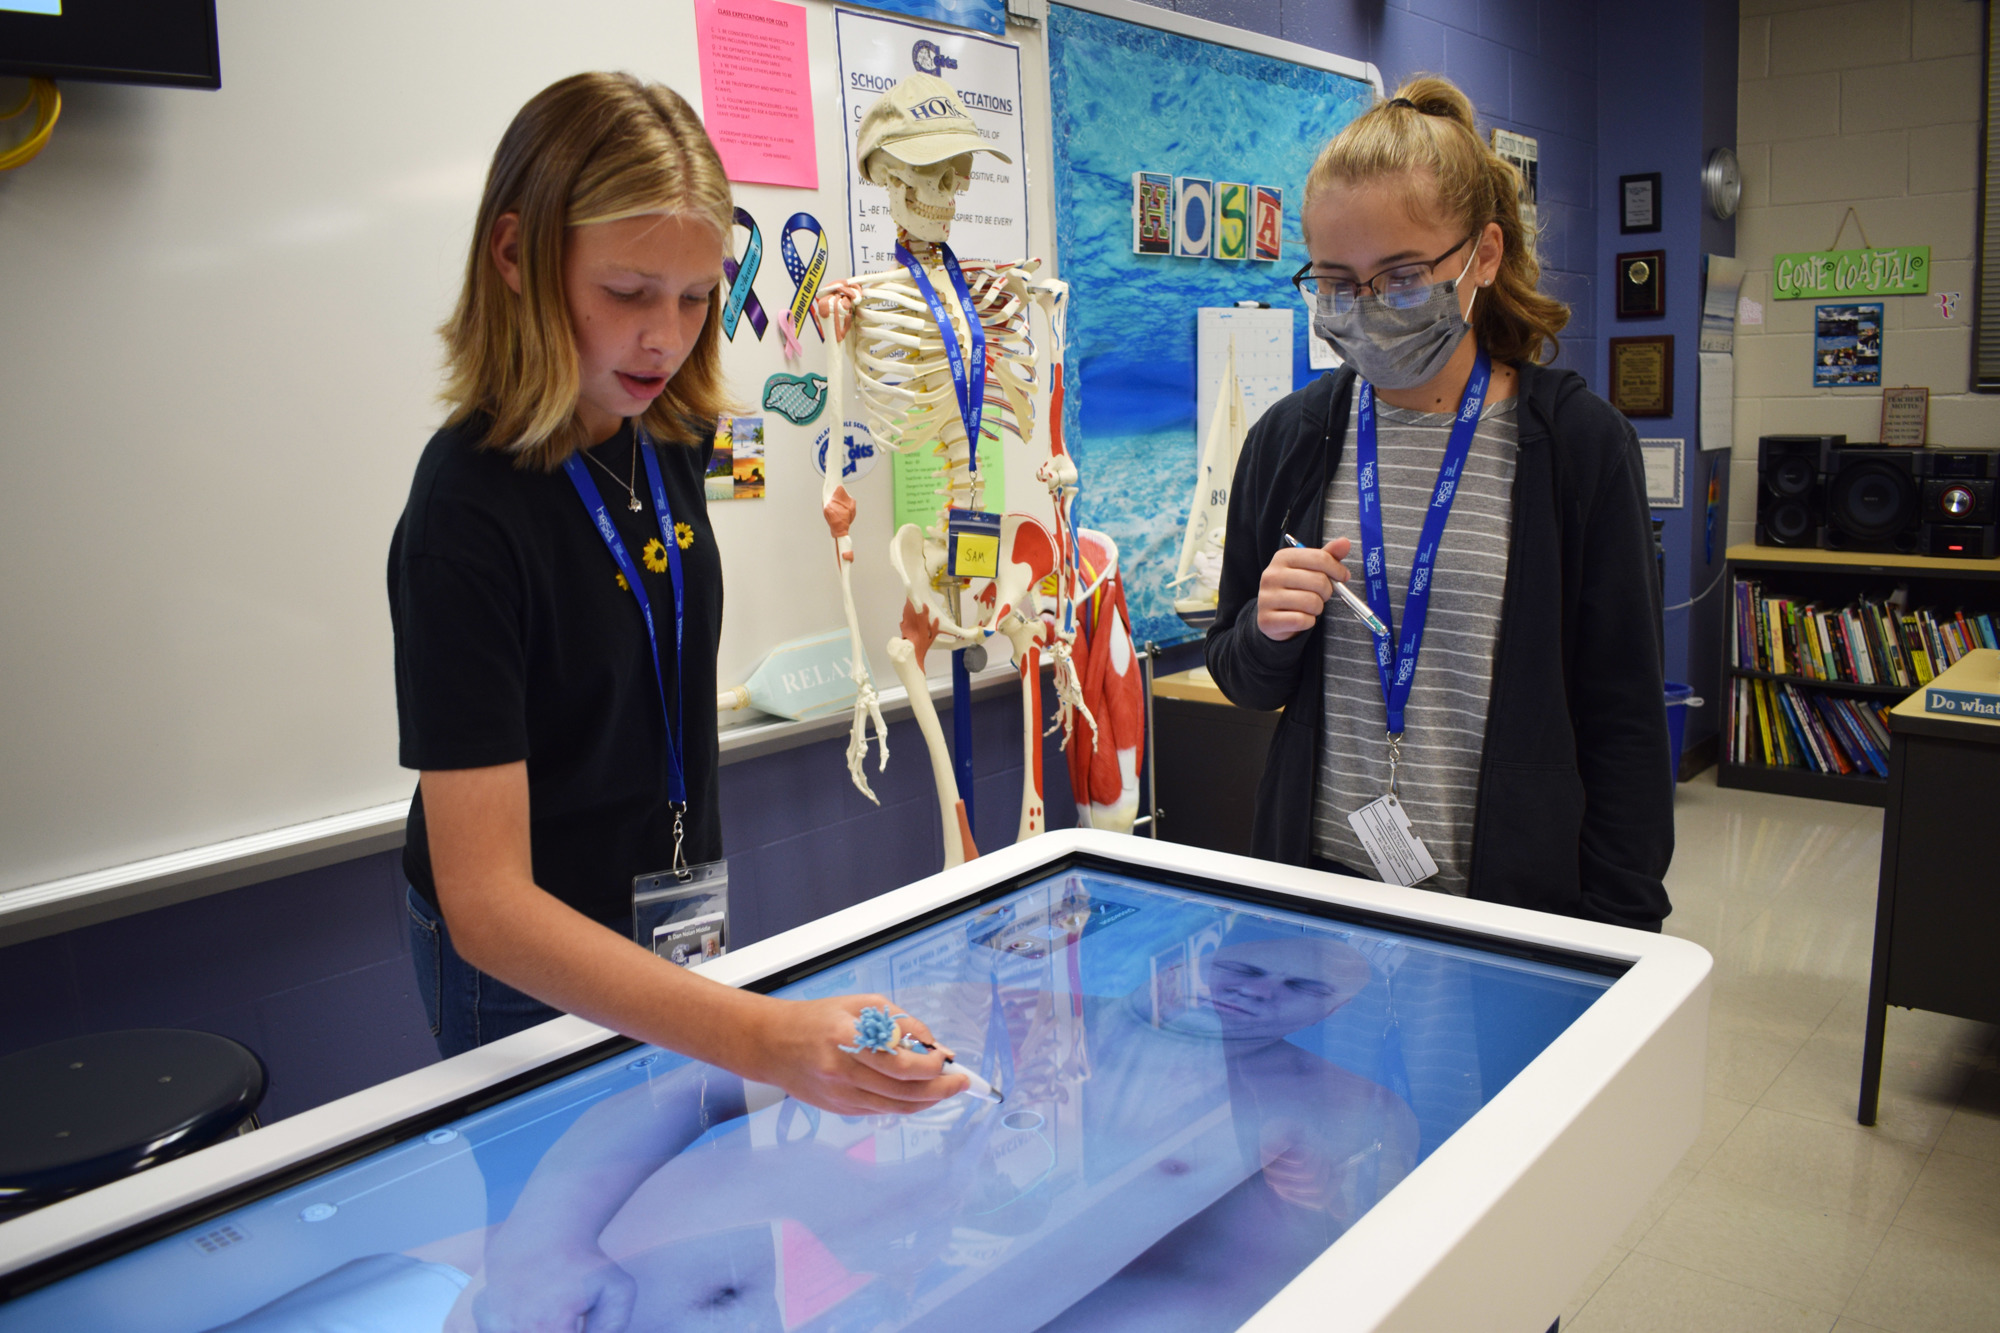 Payton Gee and Alexa Dziubek, eighth graders at R. Dan Nolan Middle School, take a look at a cadaver using the Anatomage Table that was purchased using funding from the School District of Manatee County's 1-mill ad valorem tax.